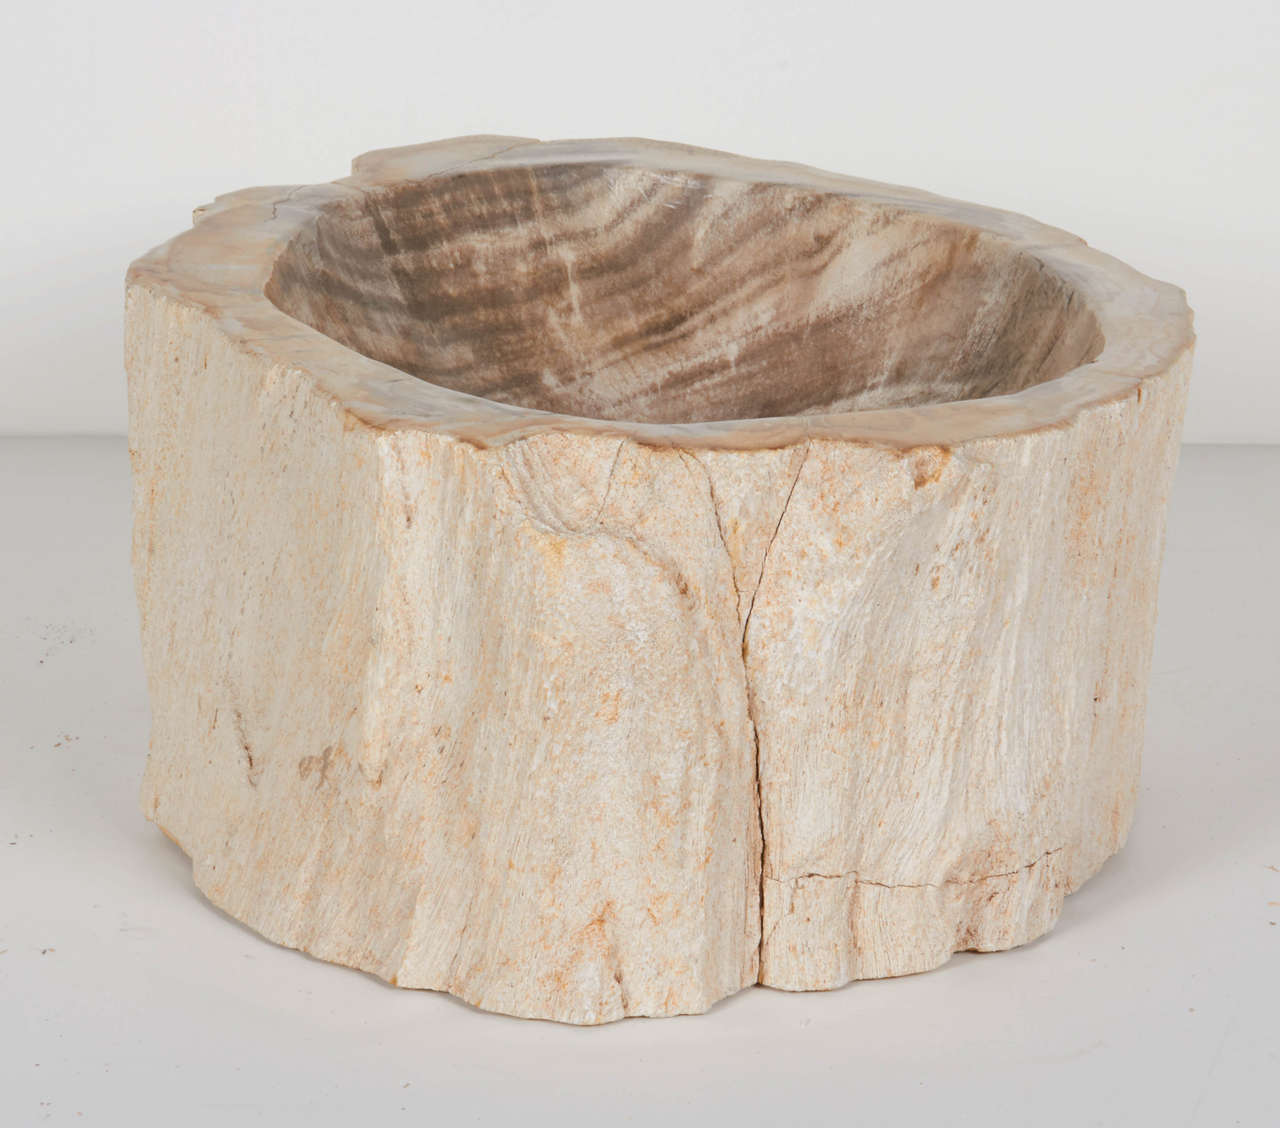 Organic petrified wood large bowl or sink with amorphous form. Naturally fossilized throughout hundreds of years. These rare pieces have been hand cut and feature the highest quality petrified wood with deep polished centers and tall sides with